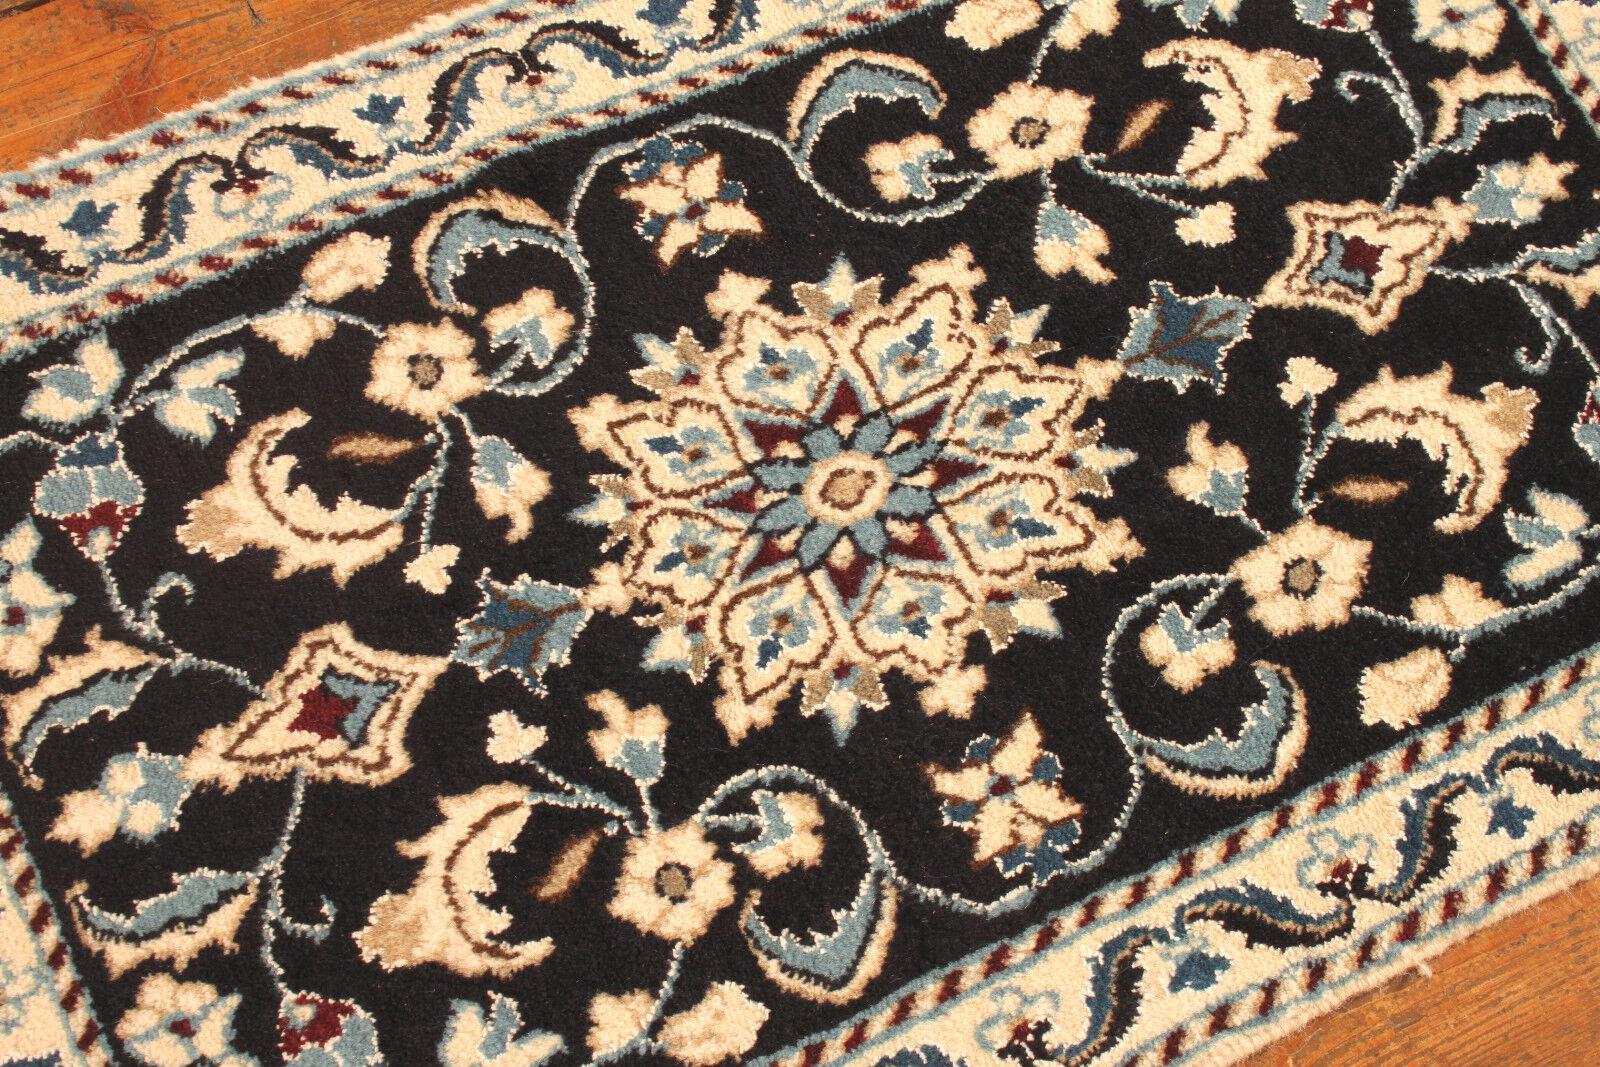 Here’s a product description for the Handmade Vintage Persian Style Nain Rug:

Handmade Vintage Persian Style Nain Rug (1.9’ x 2.9’ / 60cm x 90cm)

Embrace the intricate beauty of our Handmade Vintage Persian Style Nain Rug. Originating from the